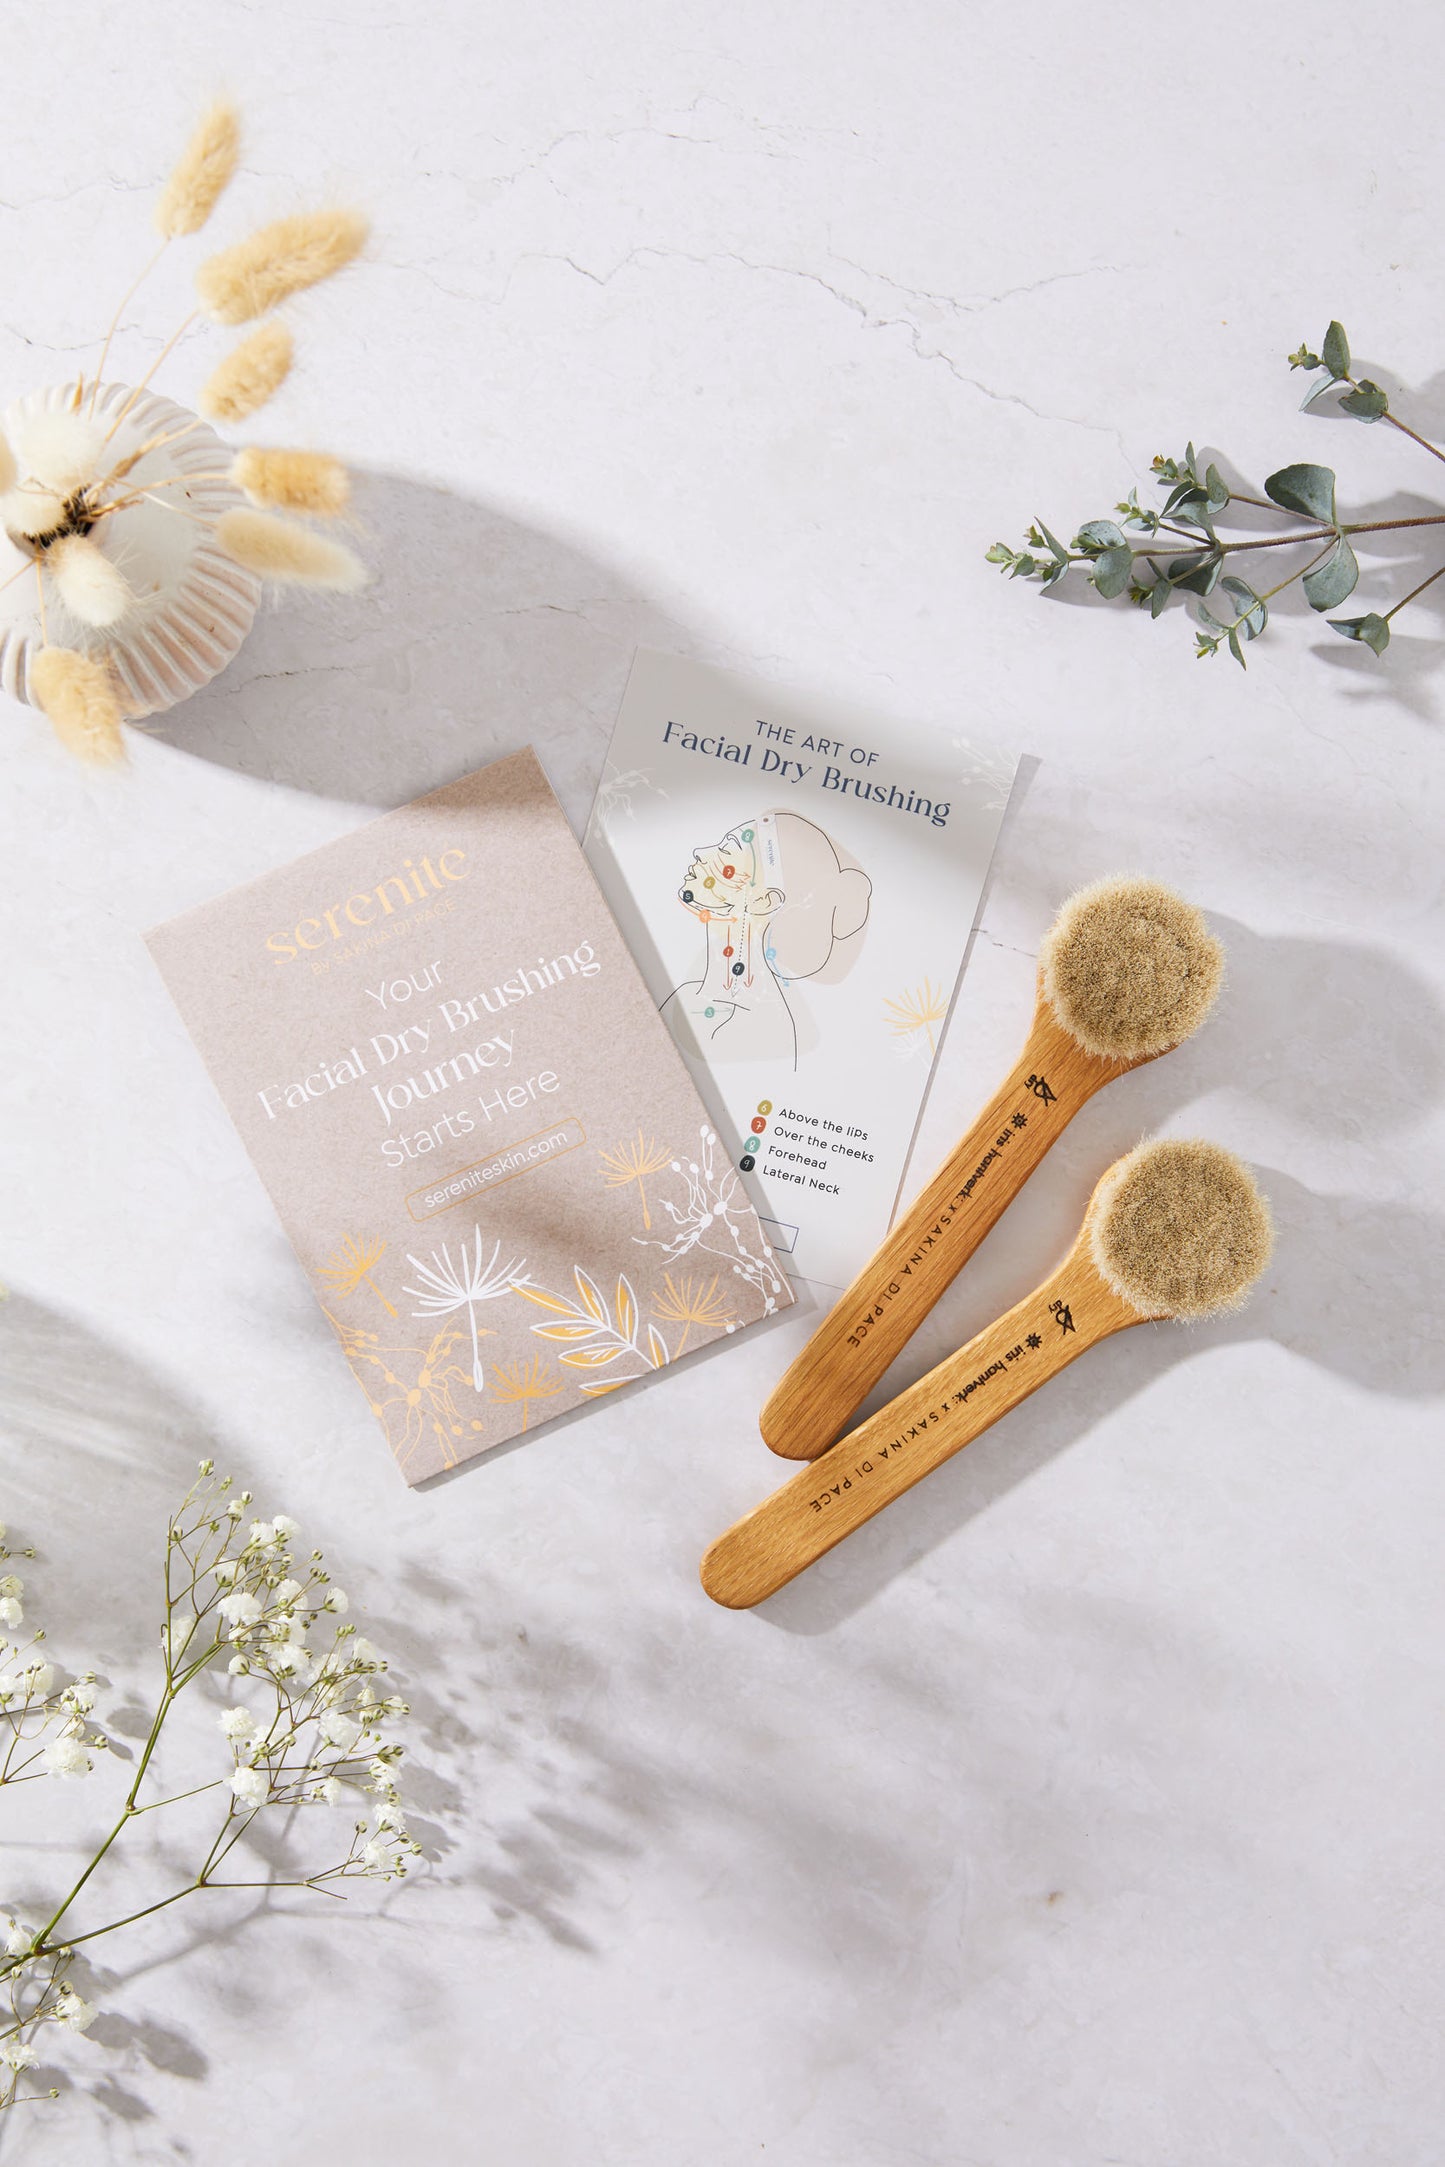 Facial Dry Brushes